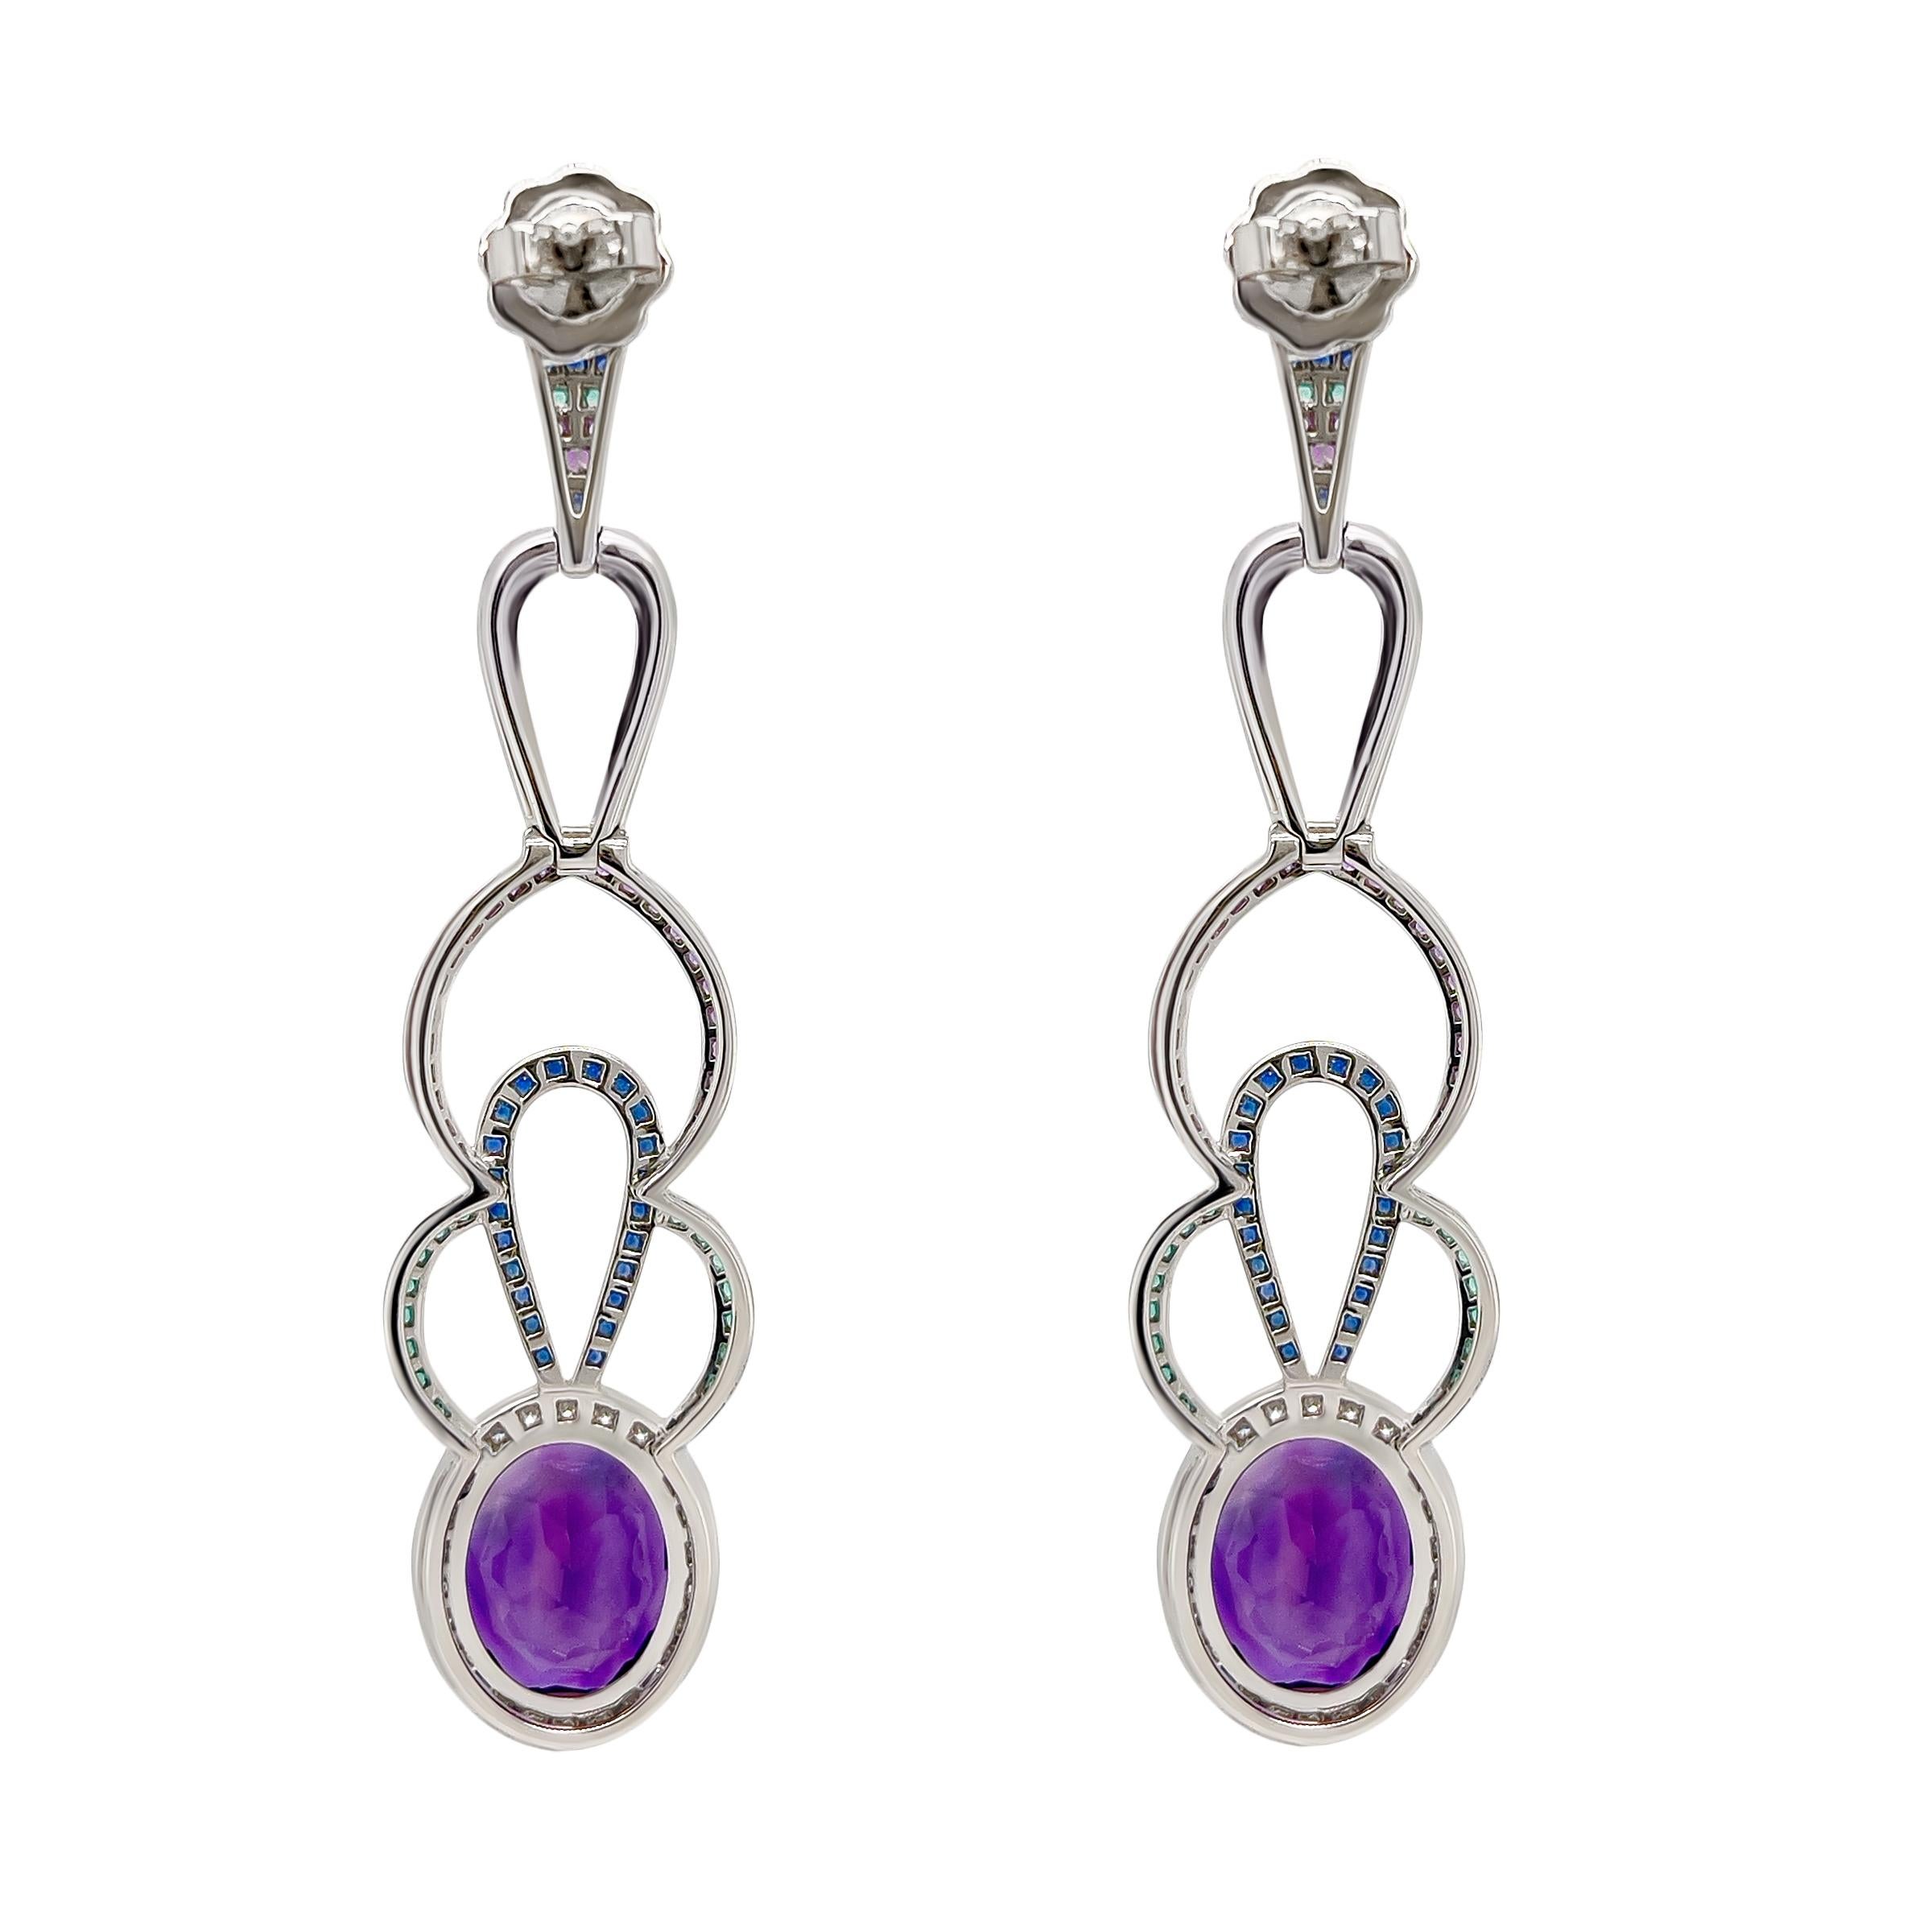 Perfectly coloured amethyst are the highlight of these 18k white gold pair of earrings. The 12.62 carat centre stones are surrounded by pave diamonds in vvs quality to help enhance their colour. The natural blue and green sapphires add a pop of